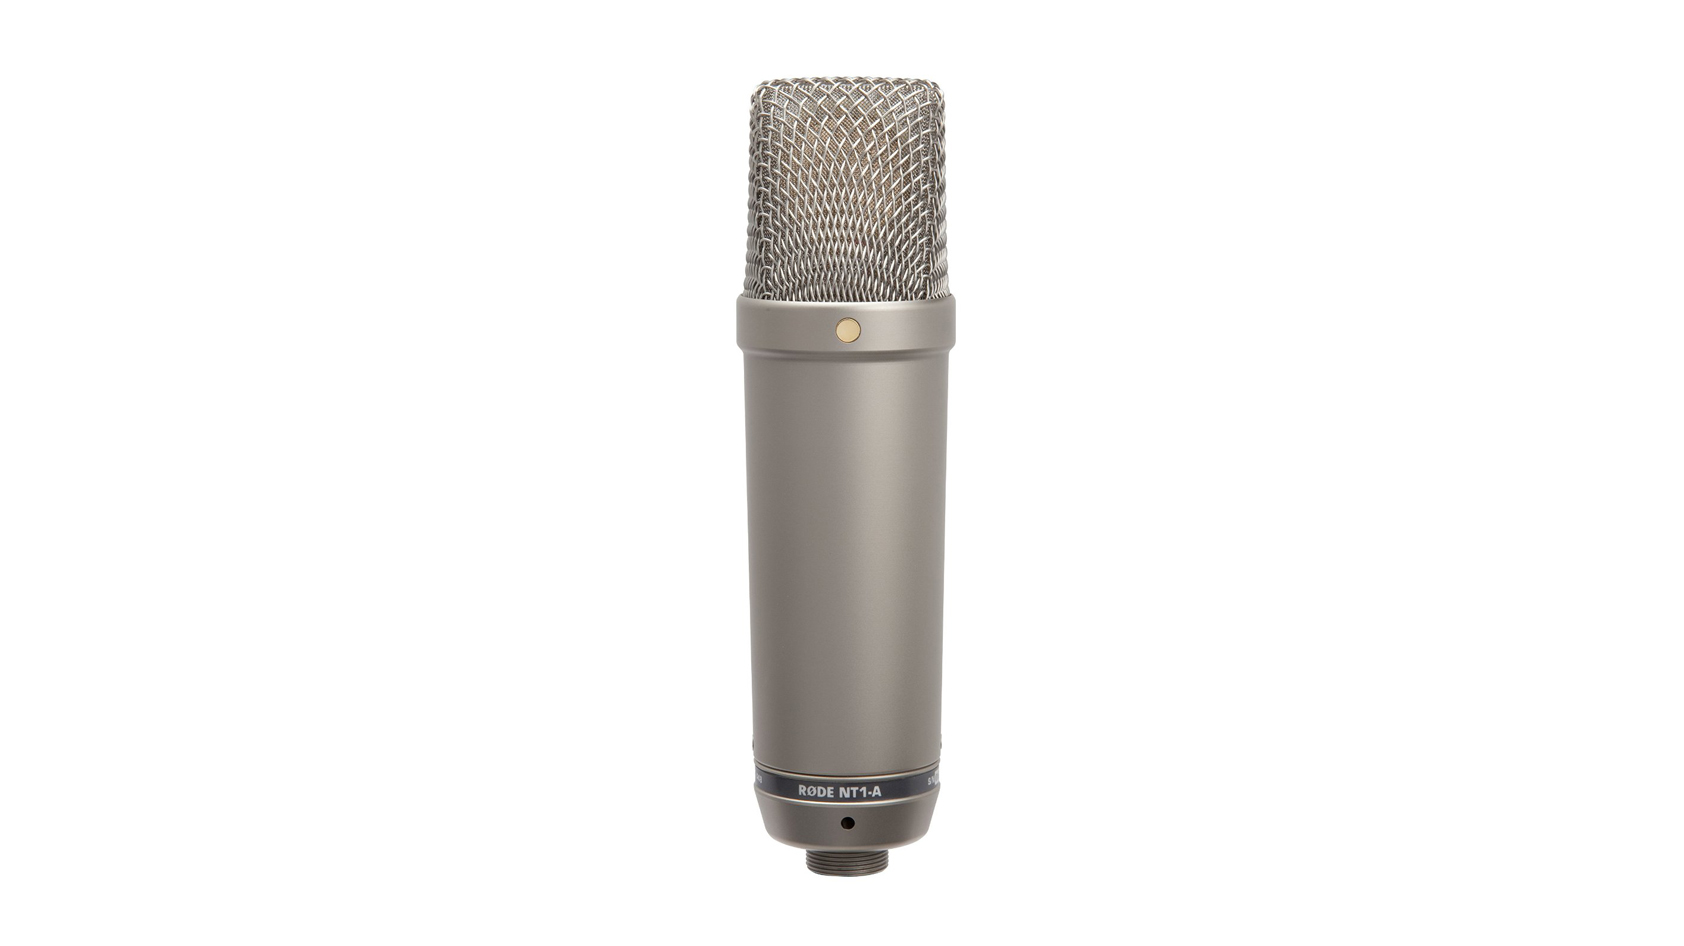 A product image of the Rode NT1-A XLR microphone.